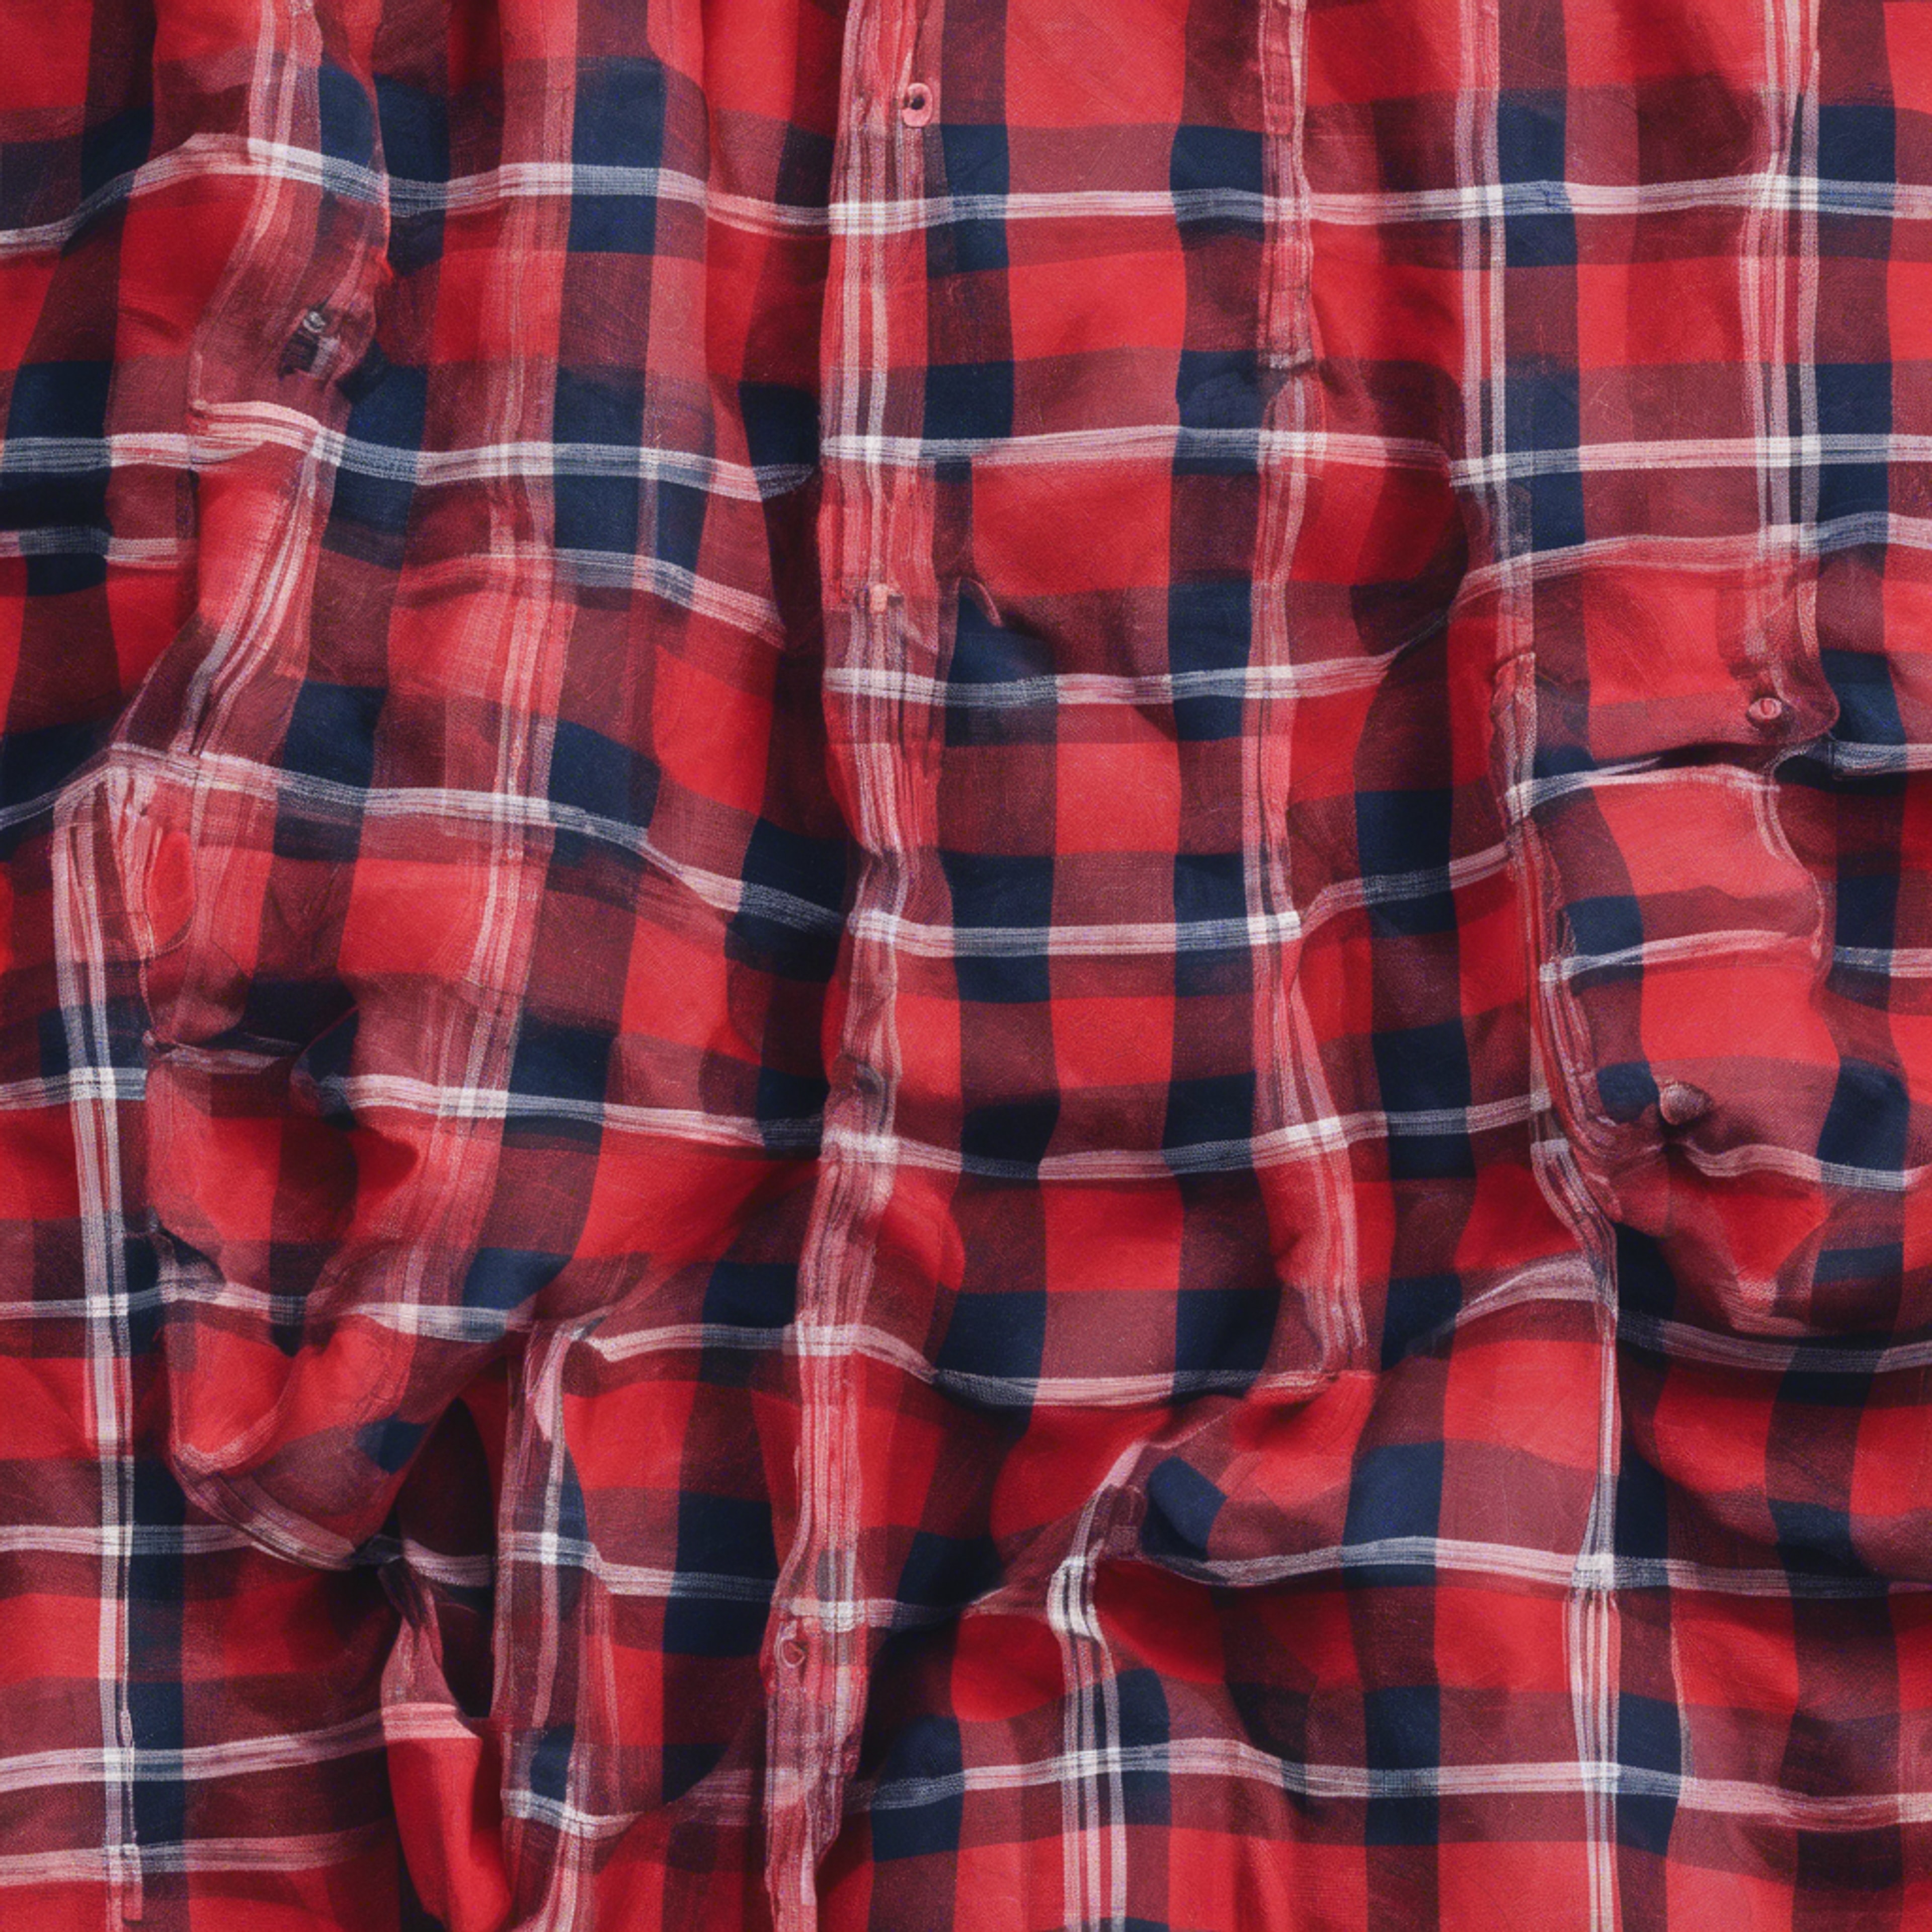 Red and navy checkered pattern resembling a flannel shirt texture.壁紙[9f4105365011412ba9d6]